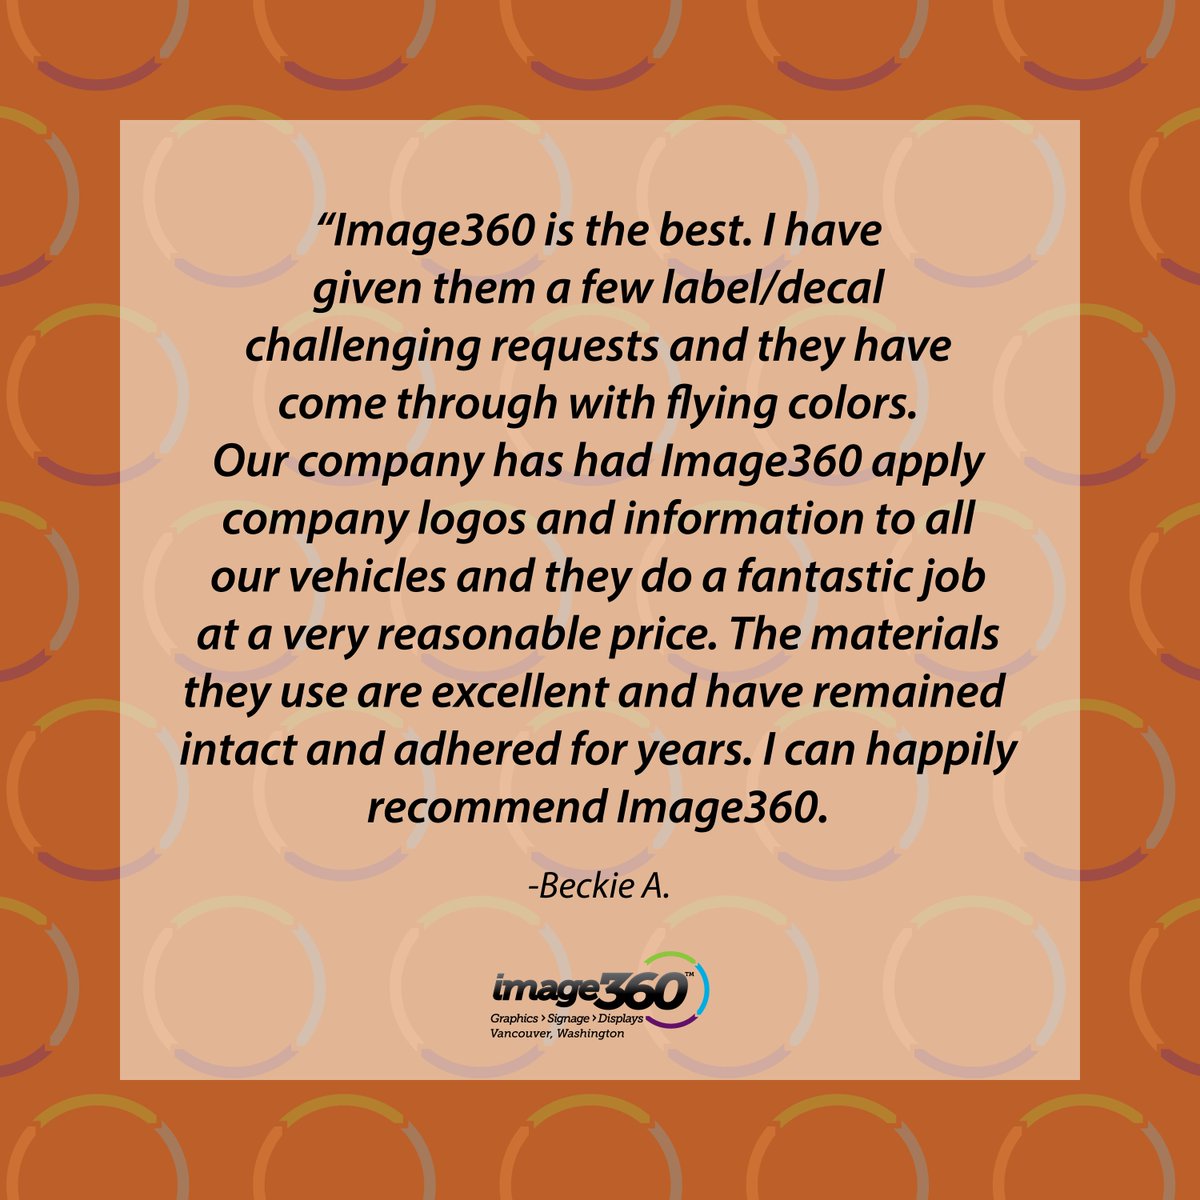 Thank you, Beckie! We love helping our friends at ProStat.
#TestimonialTuesday #image360 #image360vancouver